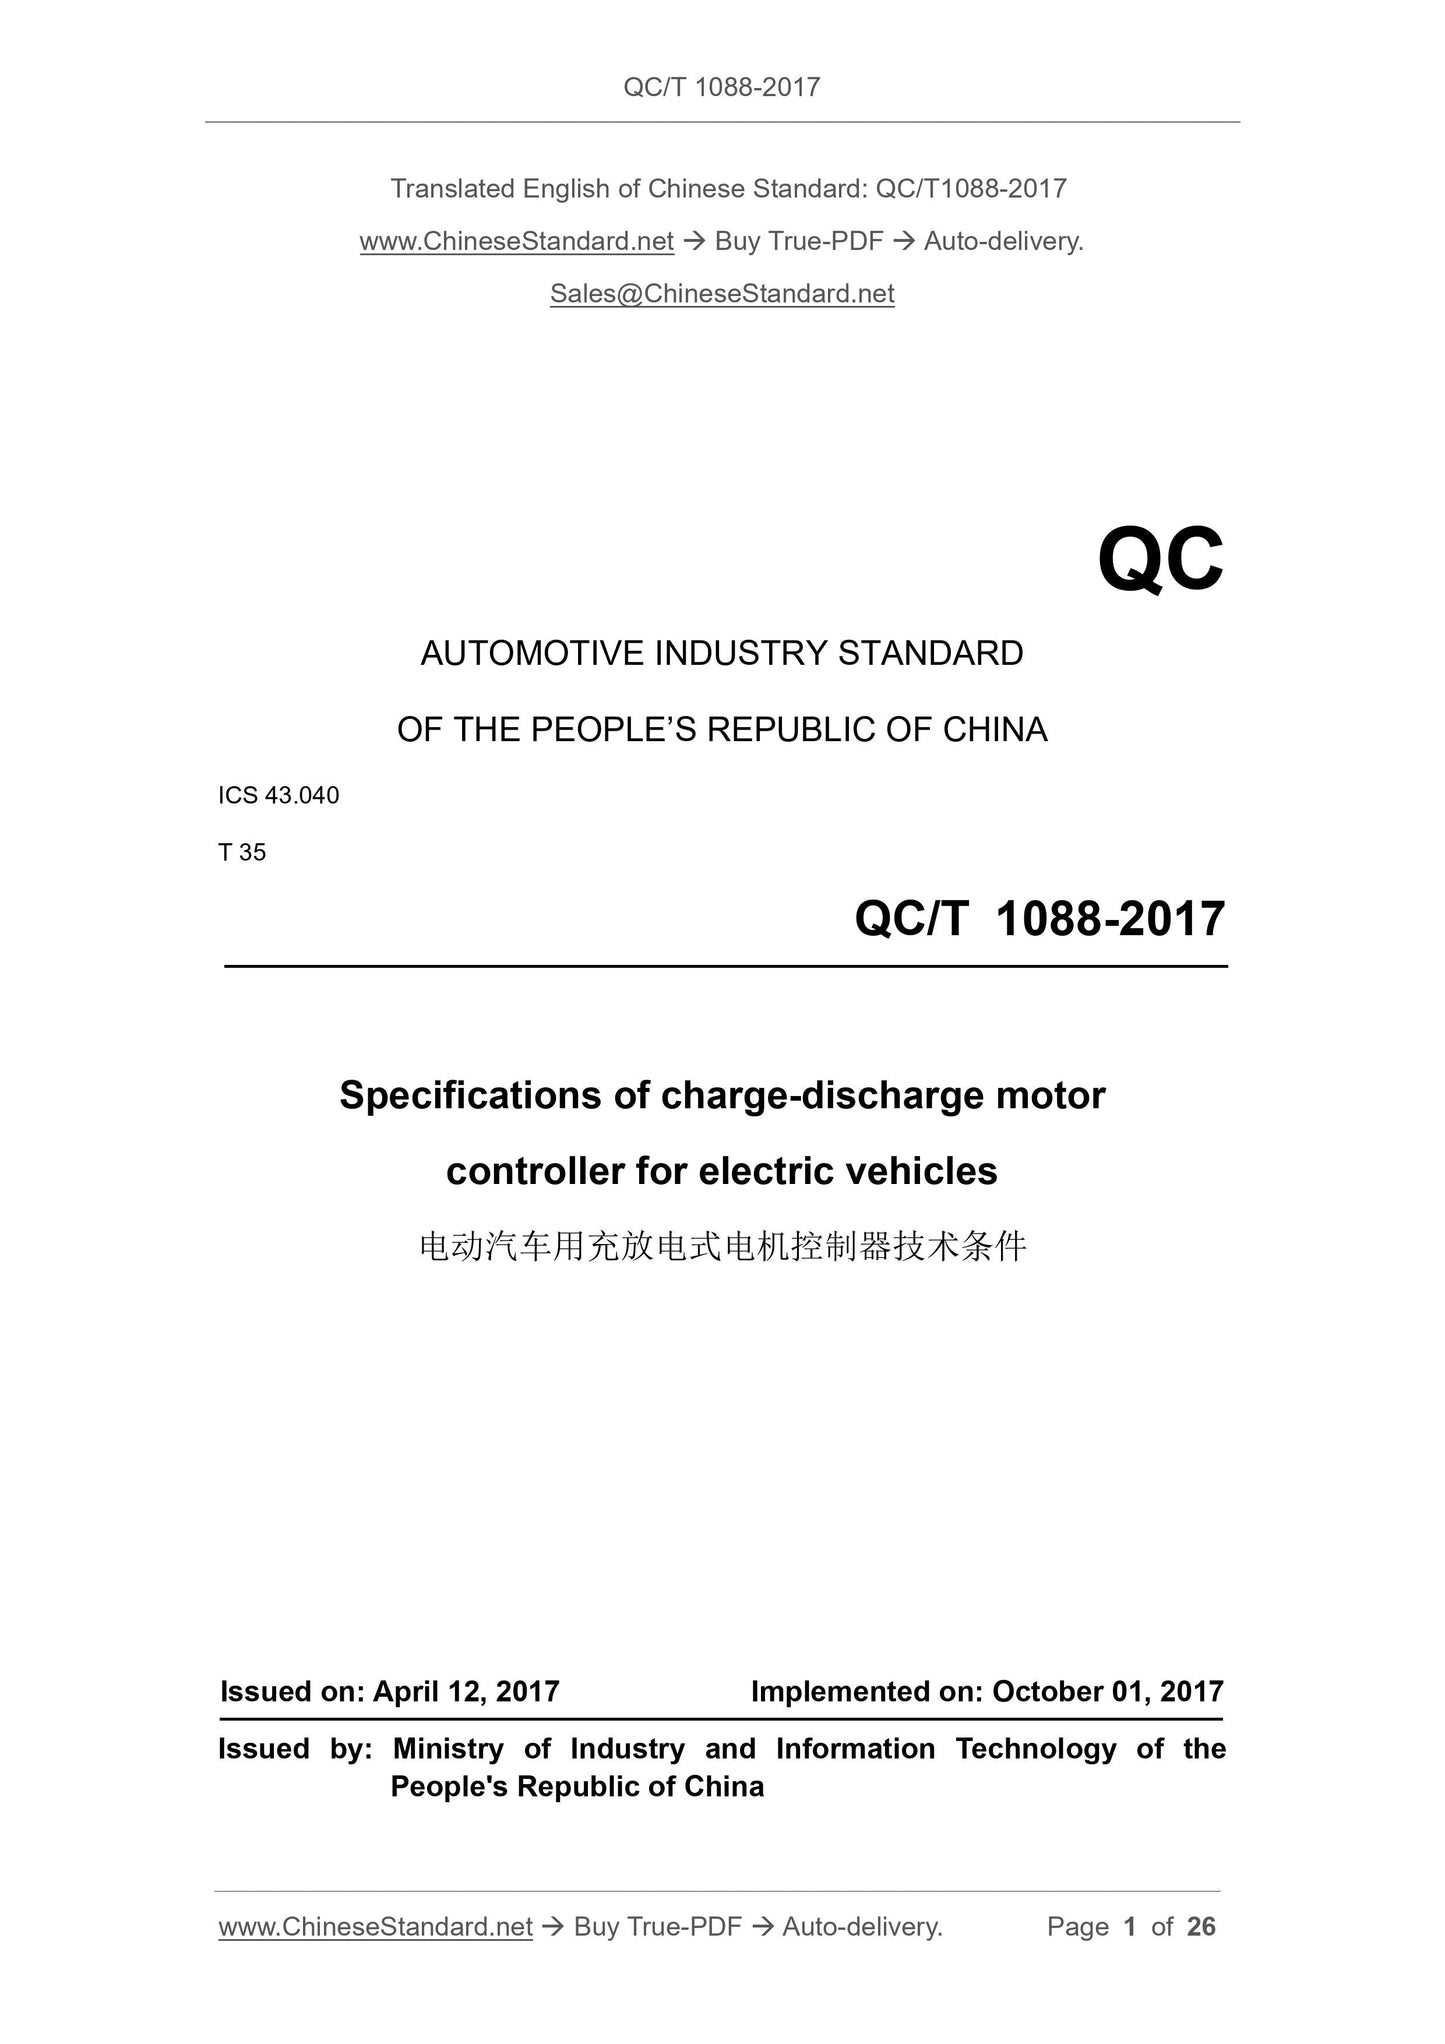 QC/T 1088-2017 Page 1